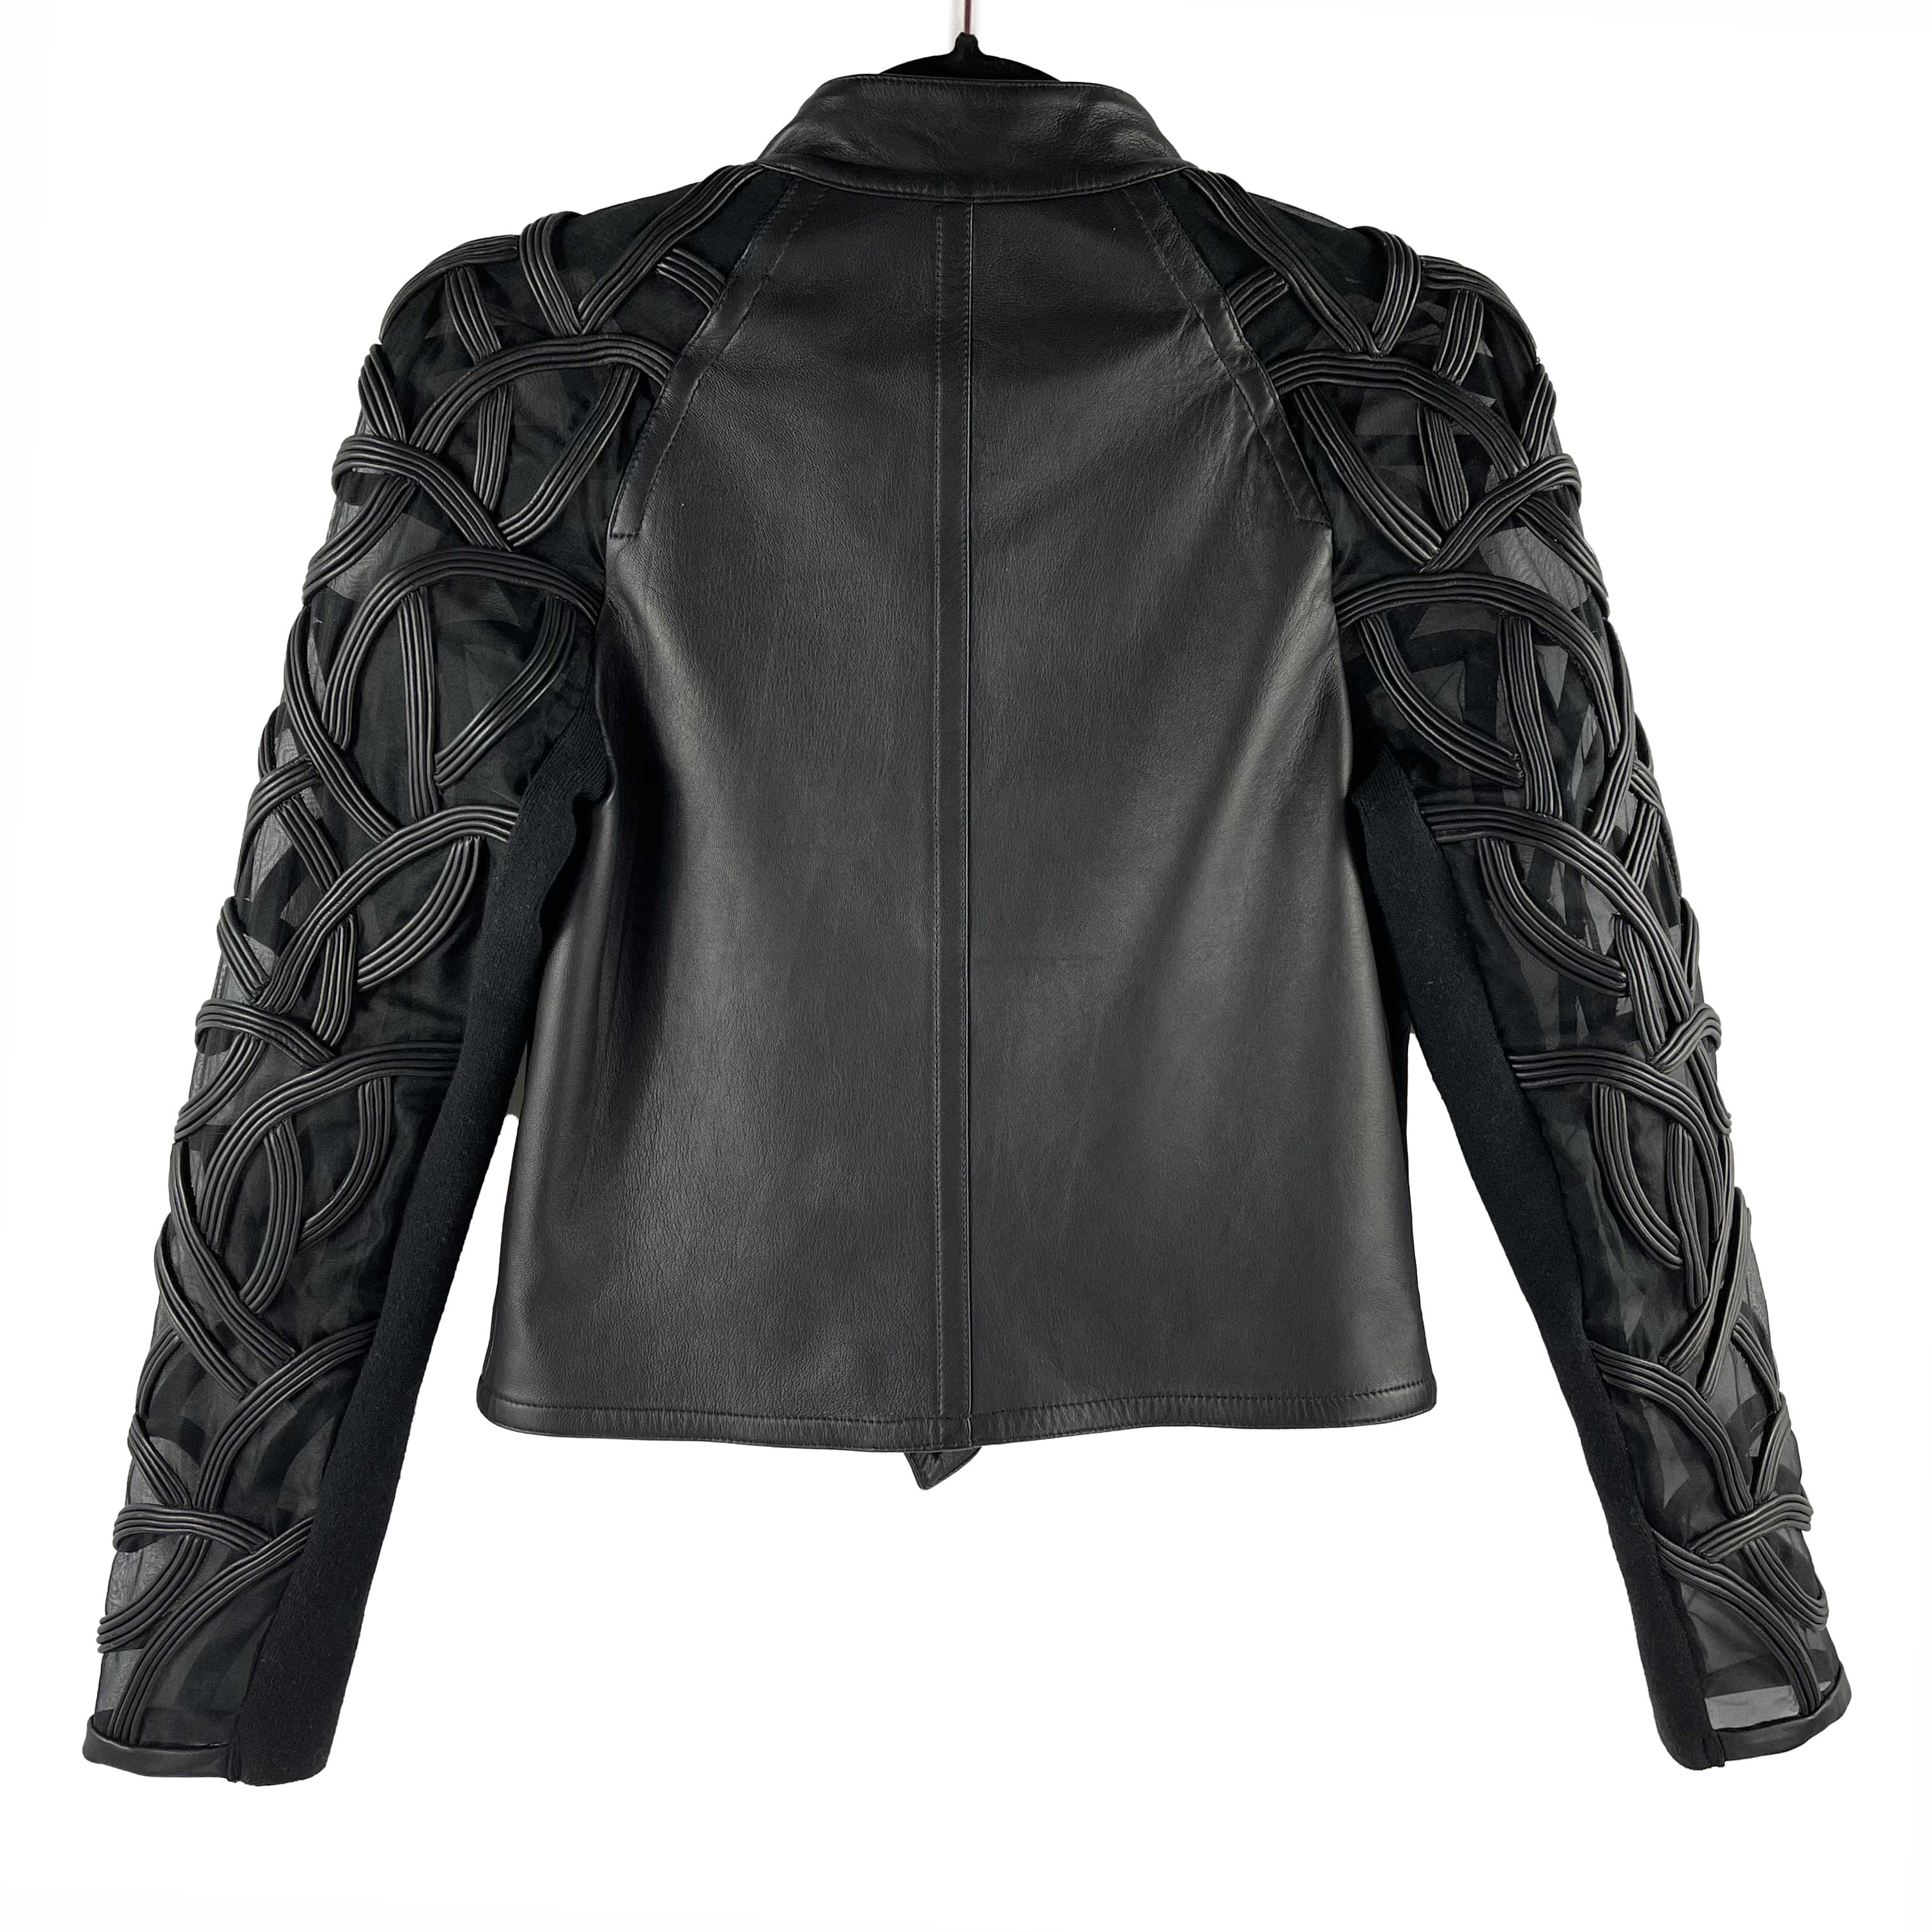 Yigal Azrouël - Sheer Embroidered Black Leather Moto Jacket - 2 / XS 

Description

This leather motorcycle jacket is designed with sheer sleeves embroidered in swirling ropes of leather.
Snap closure.
Zip front.
Silver tone